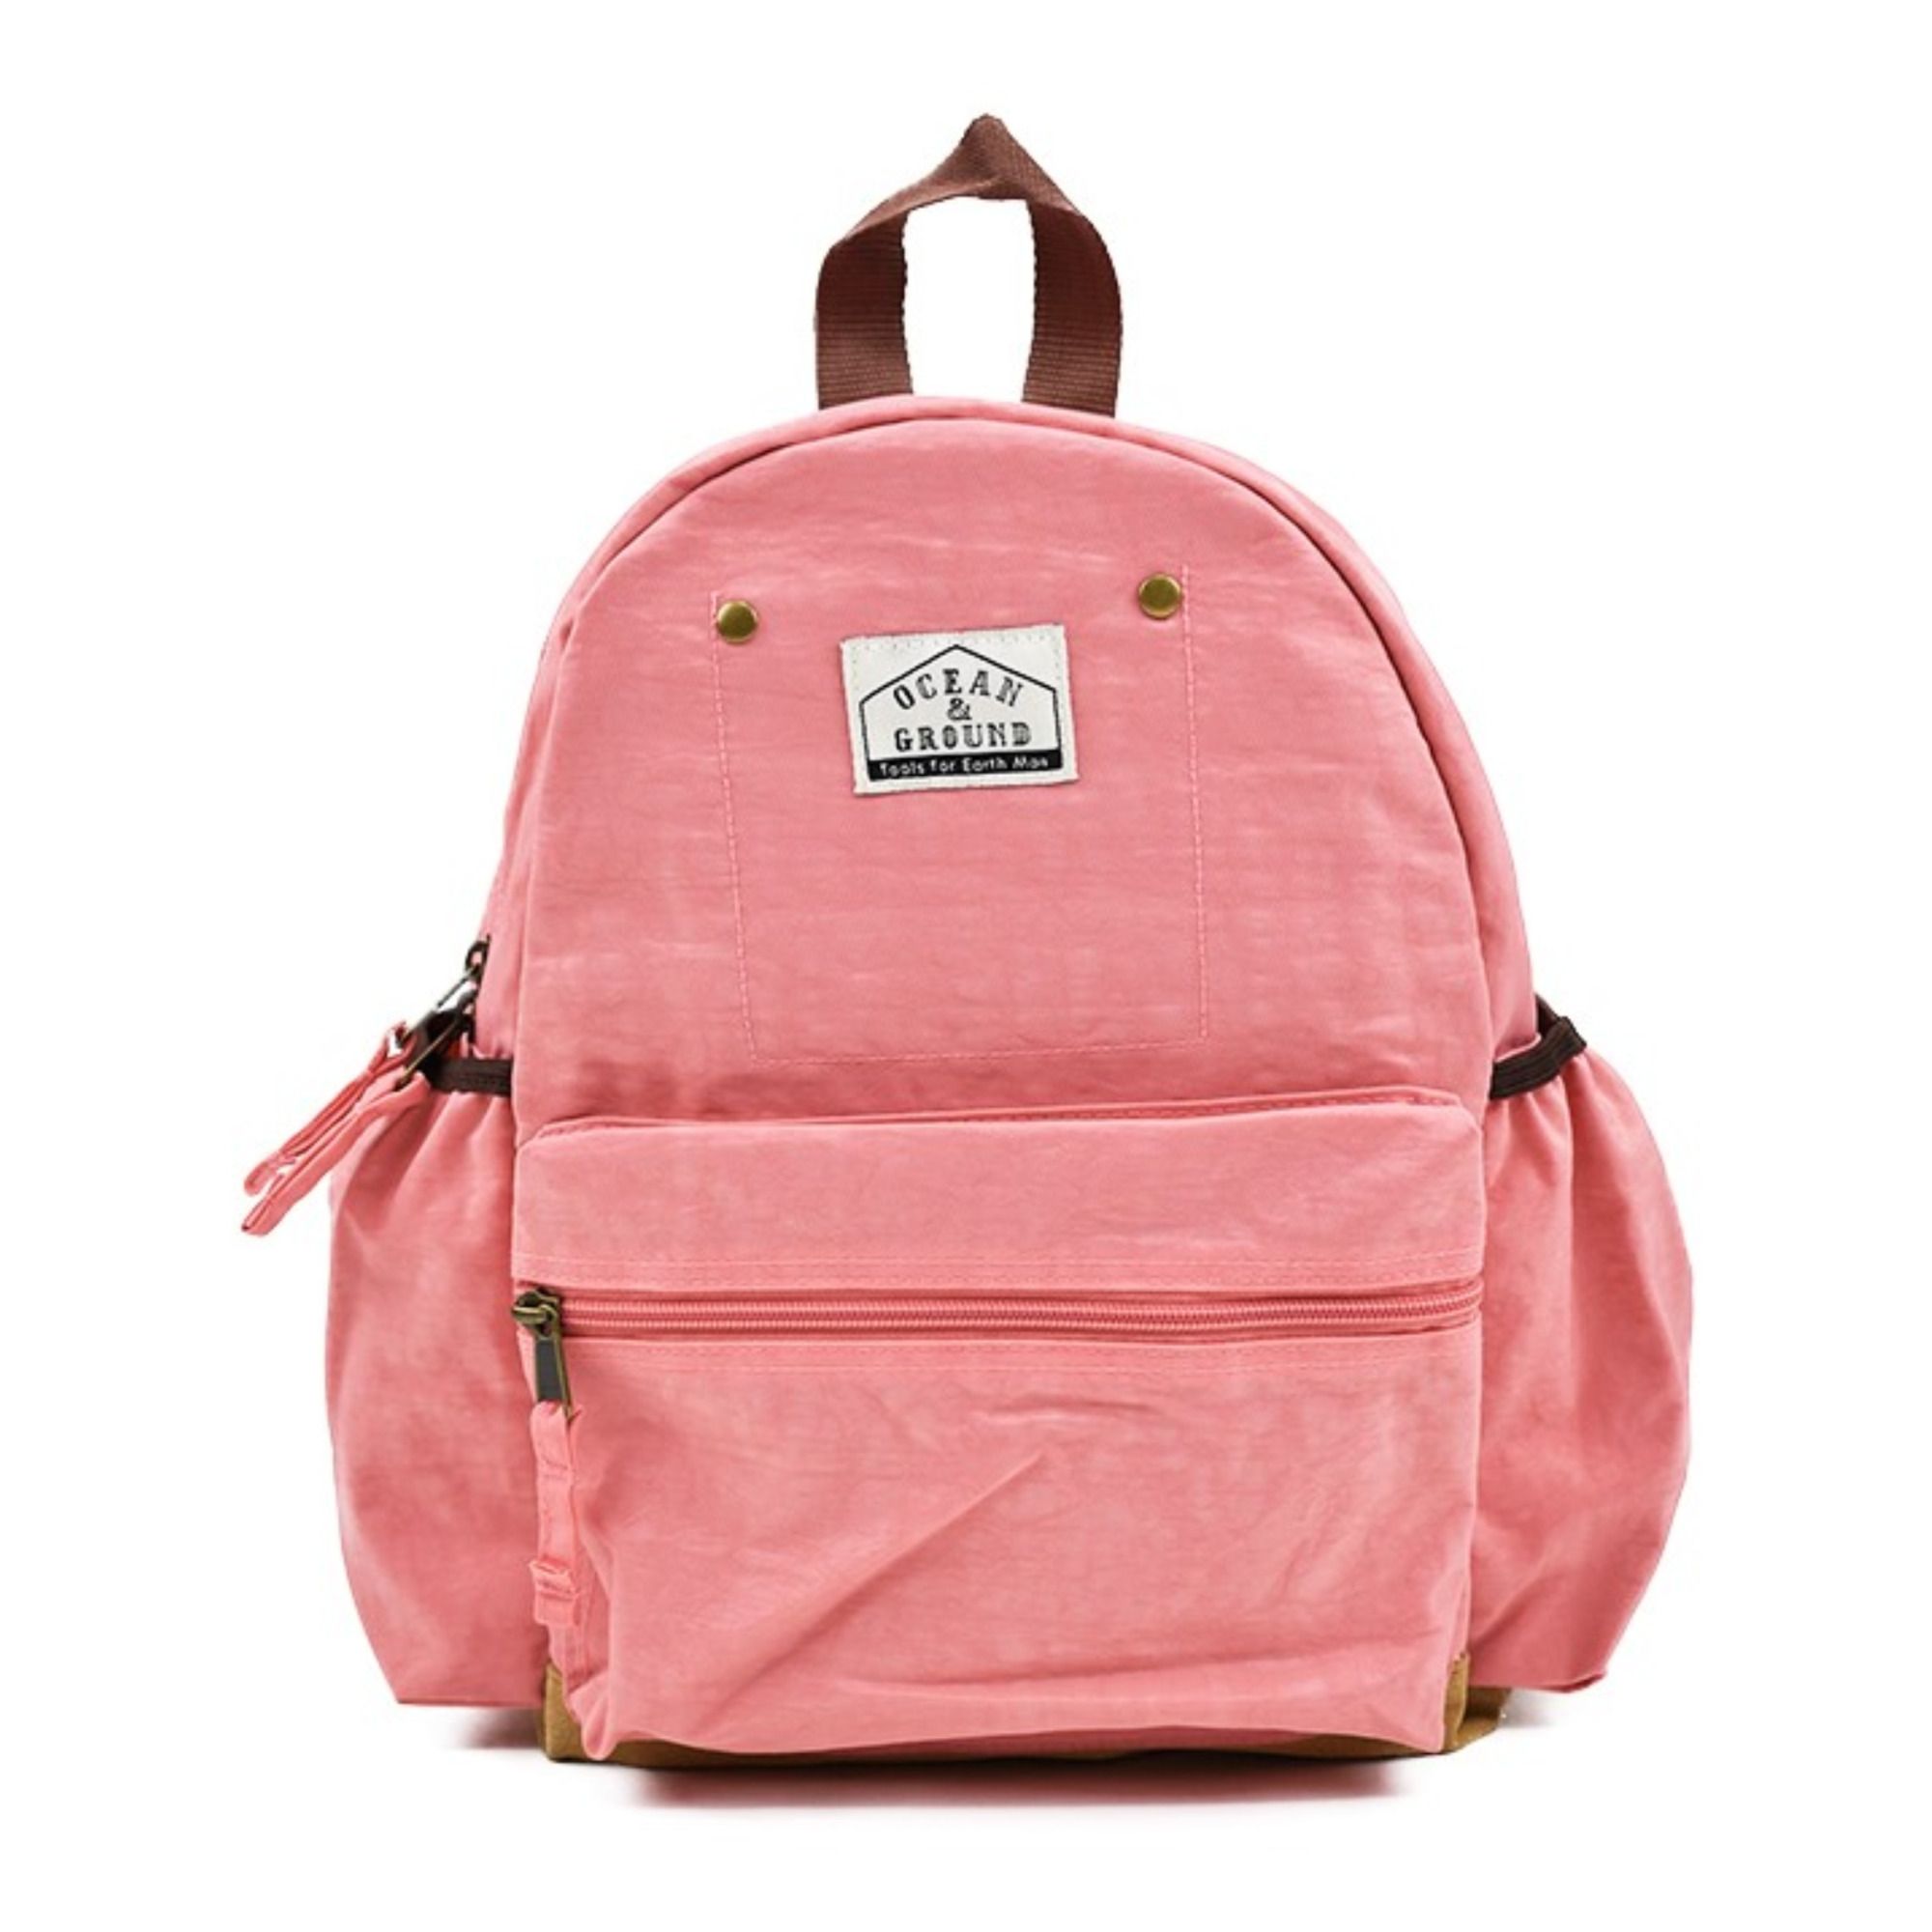 Ocean&Ground - Sac à Dos Gooday Vintage Small - Fille - Rose